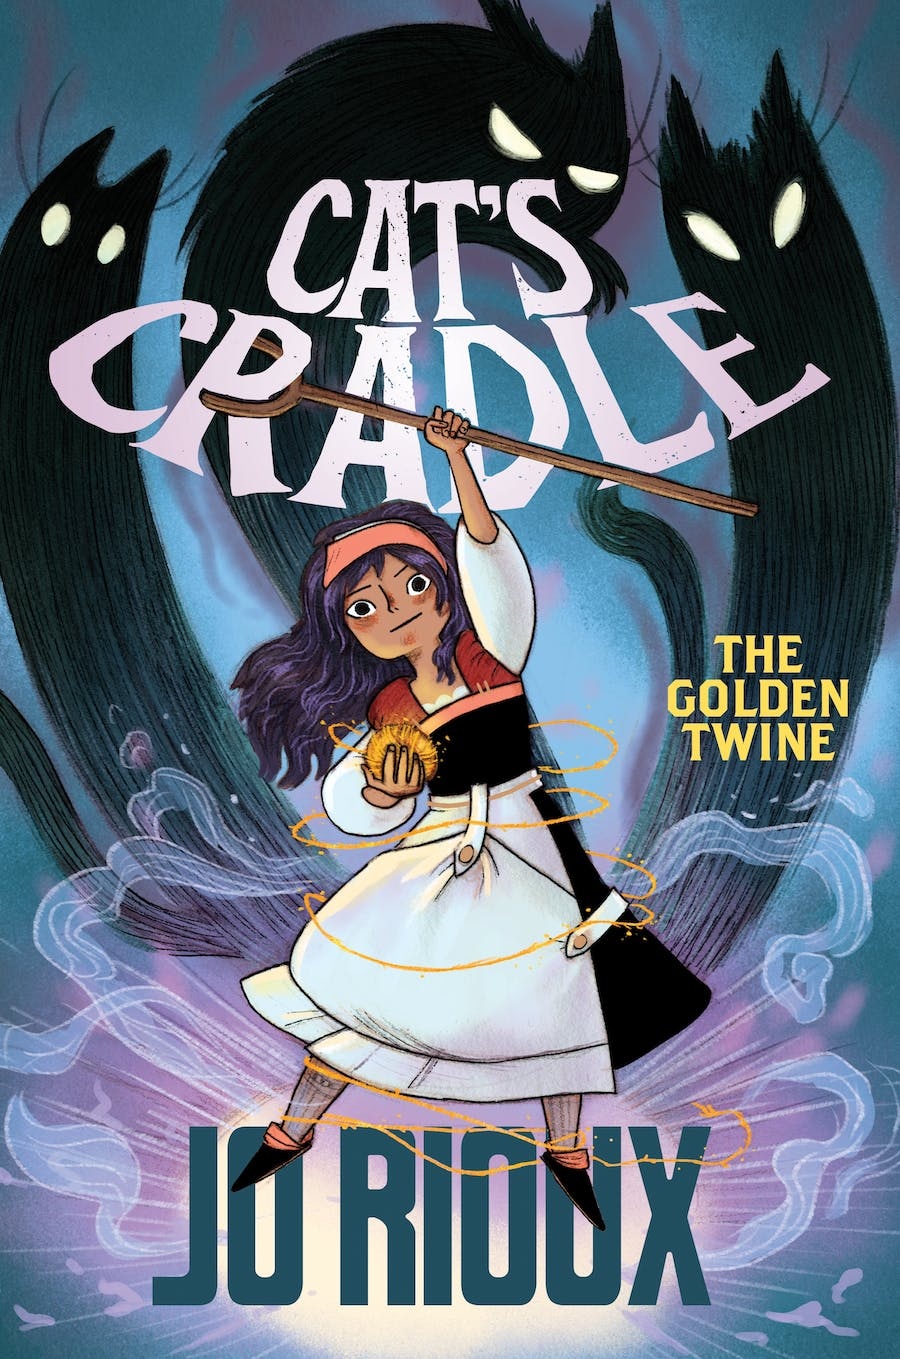 Cat's Cradle: The Golden Twine by Jo Rioux (8+)